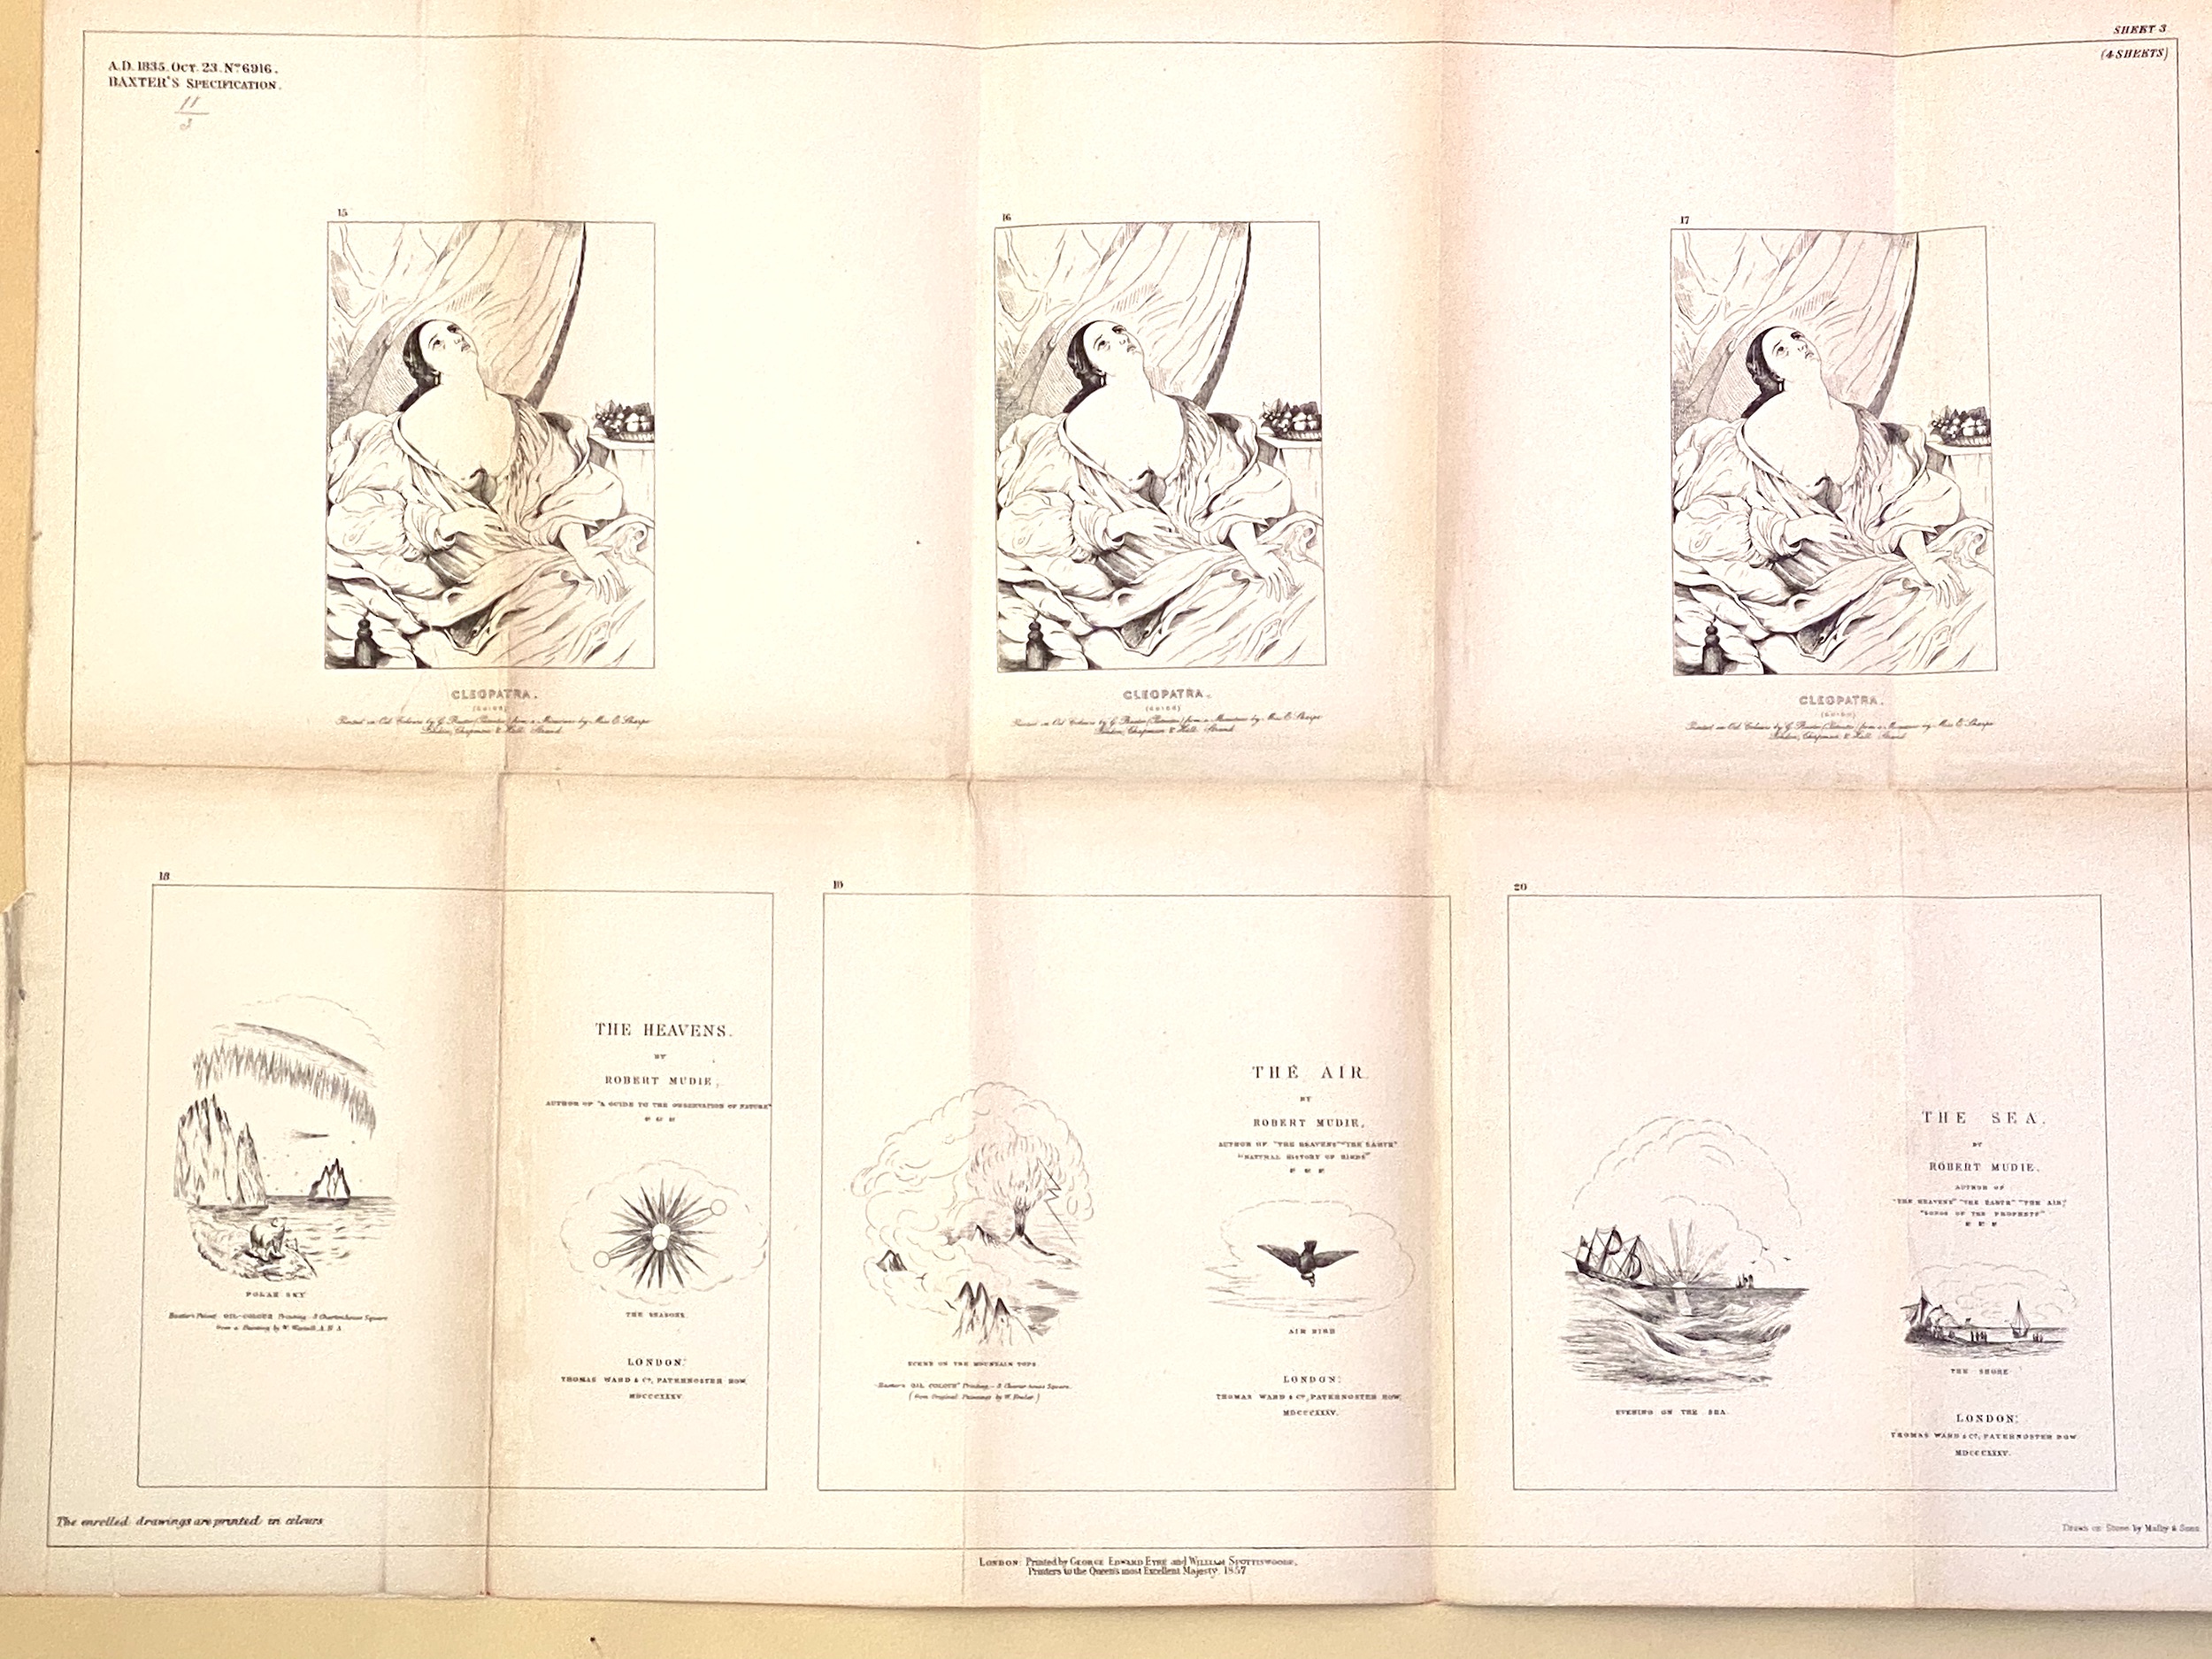 This is sheet three of the images for Baxter's patent